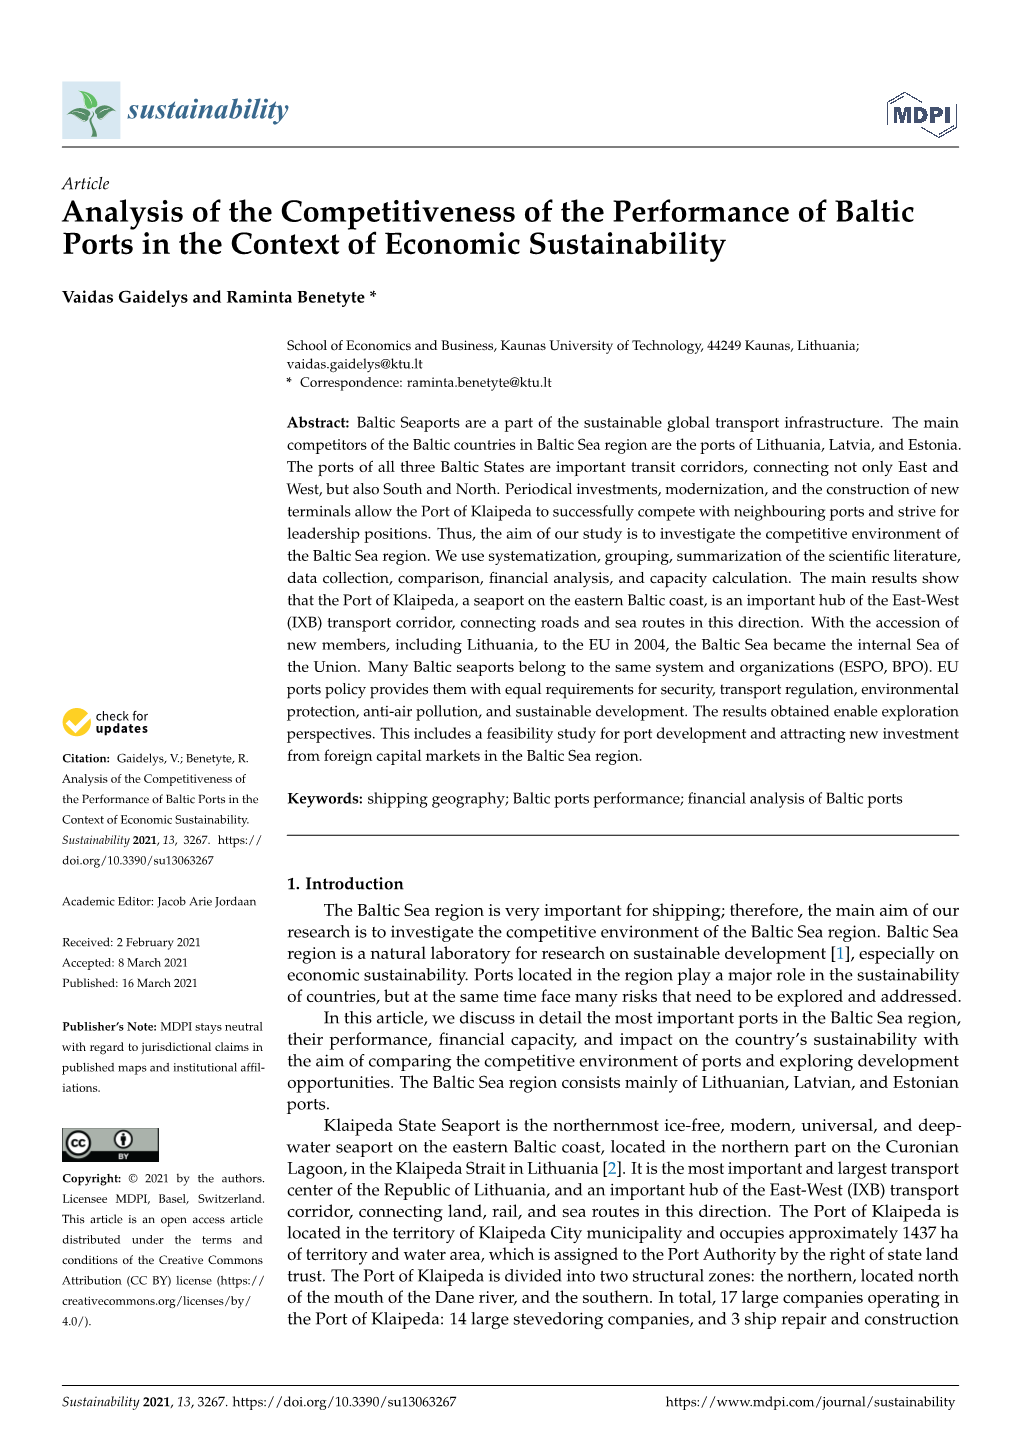 Analysis of the Competitiveness of the Performance of Baltic Ports in the Context of Economic Sustainability